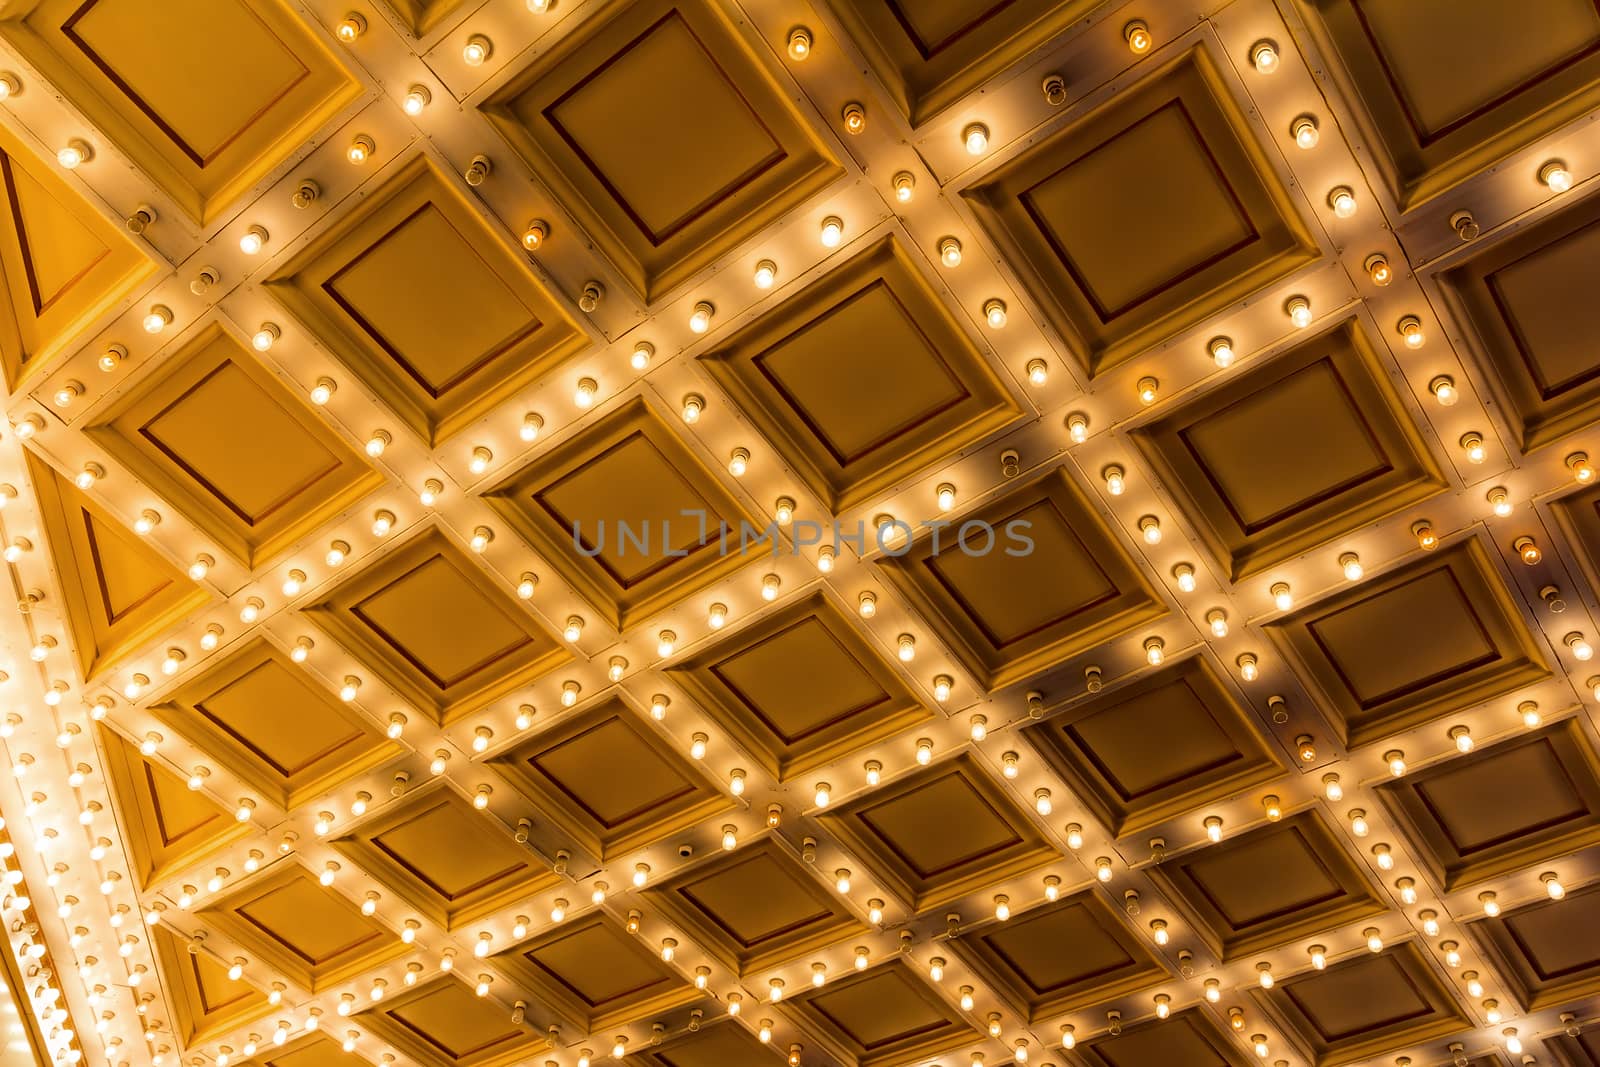 Marquee Lights on Theater Ceiling by Davidgn